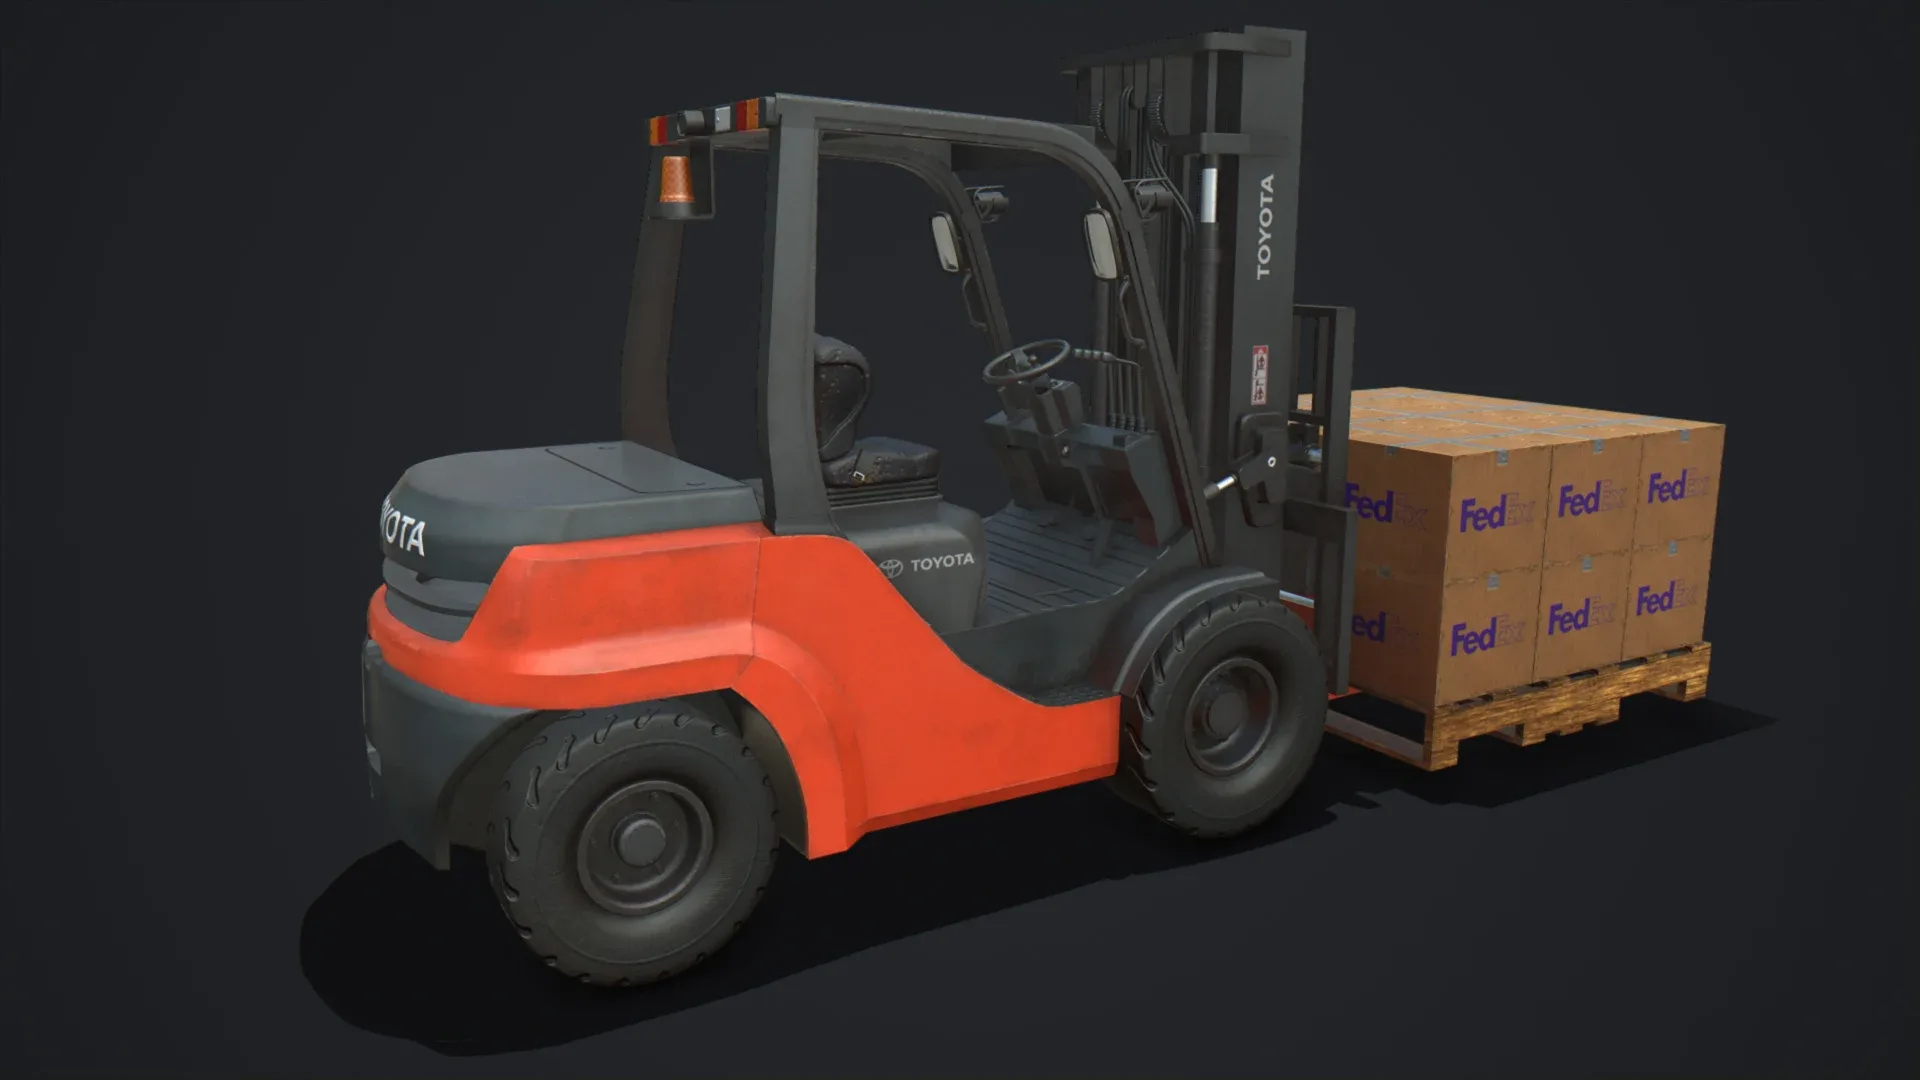 Toyota Pneumatic Tire Forklift with Boxes